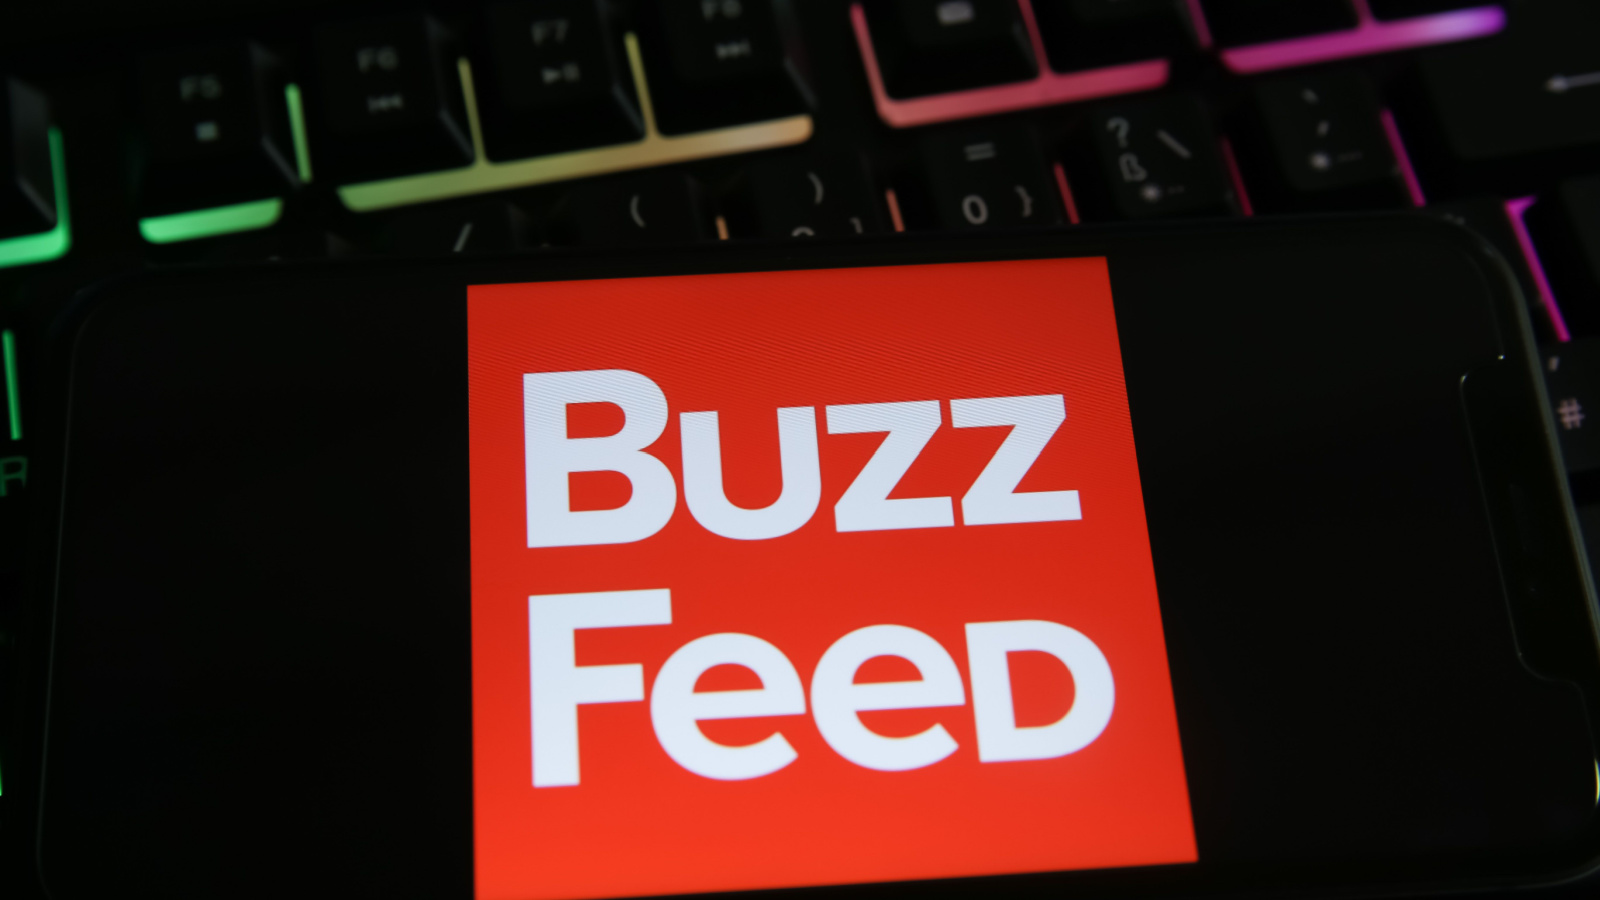 Buzzfeed (BZFD) logo displayed on screen resting on top of a black keyboard with colorful lighting behind keys